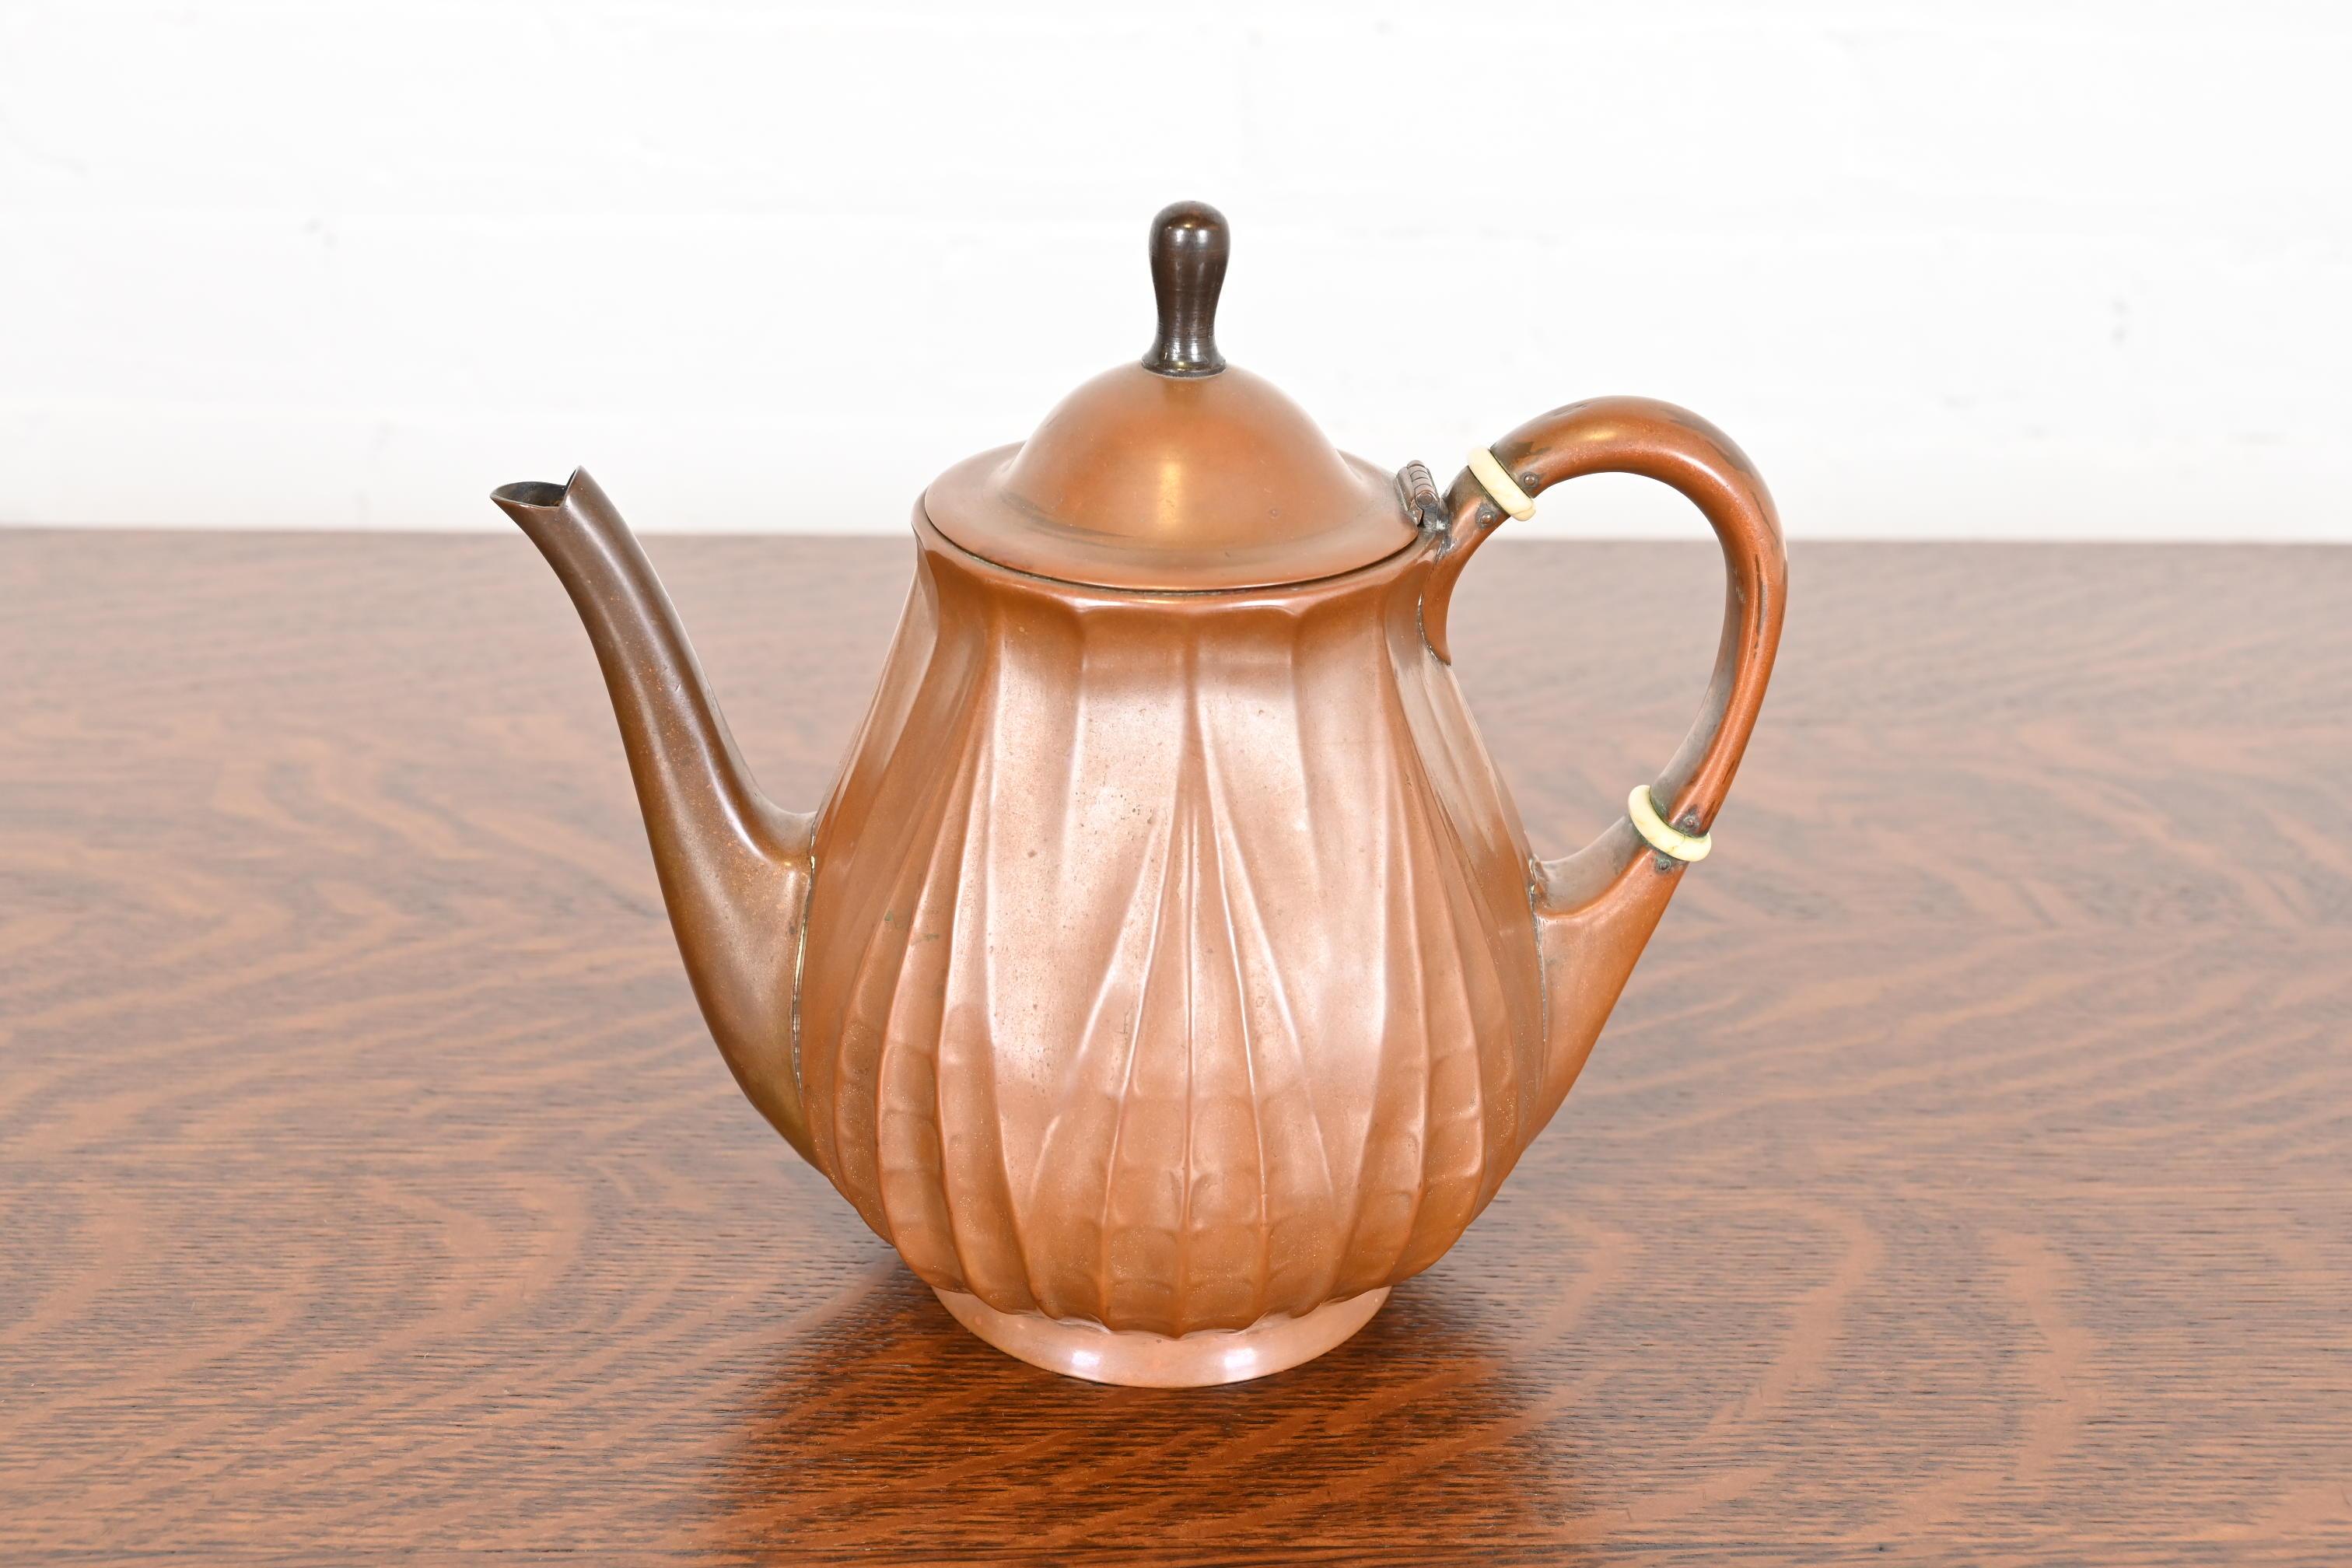 A gorgeous Arts & Crafts period copper tea kettle

By Tiffany Studios (signed to the underside)

USA, Circa 1910

Measures: 8.5